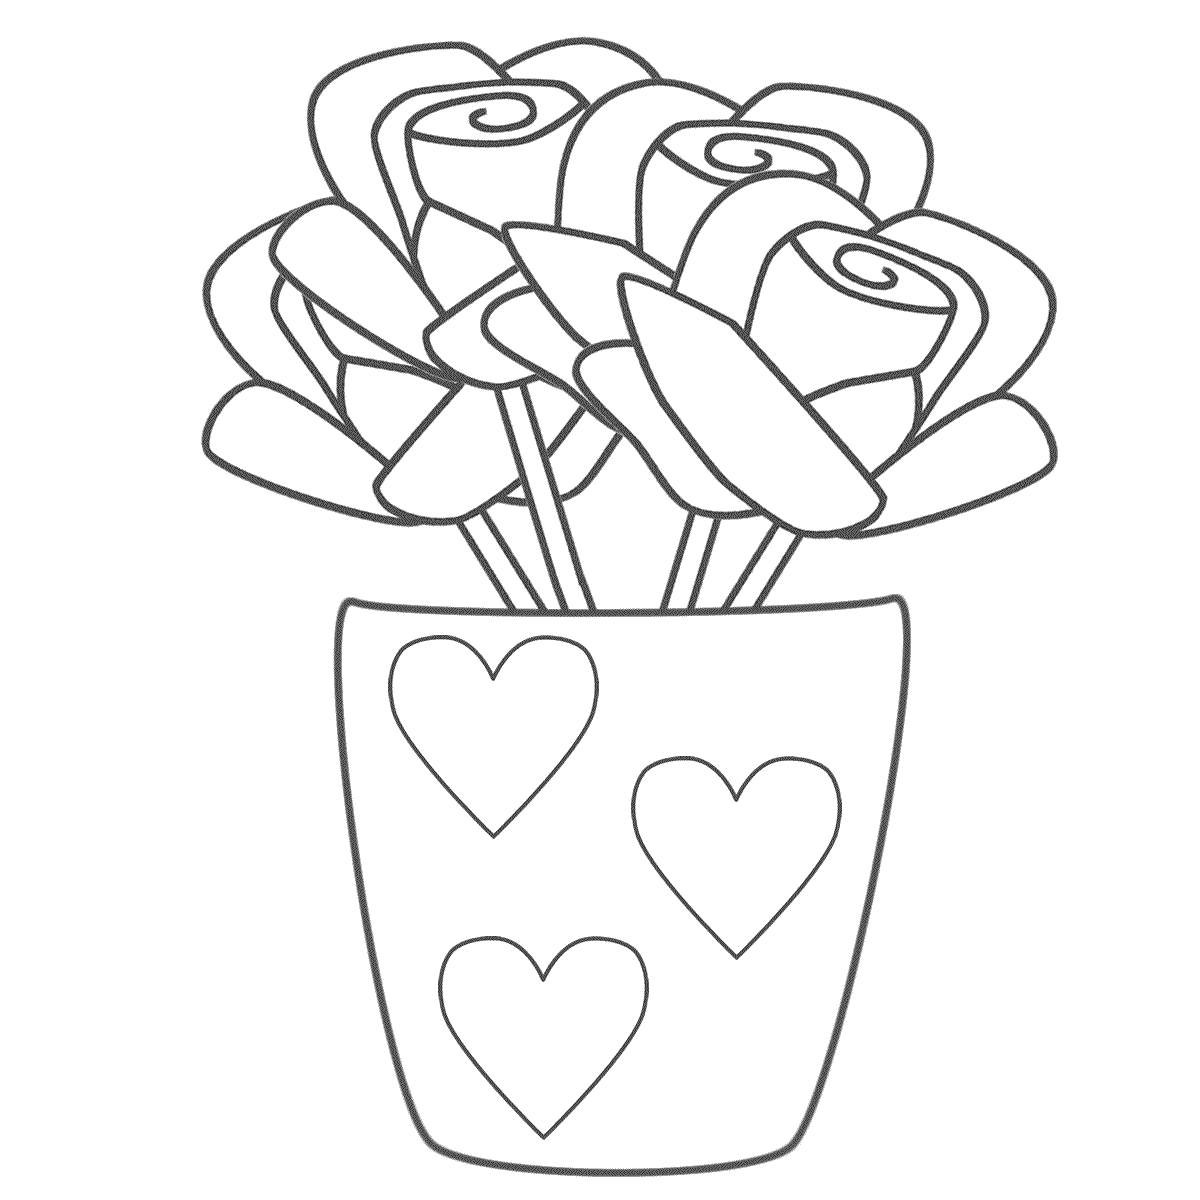 Mother's Day Flowers in Vases Coloring Page - Get Coloring Pages